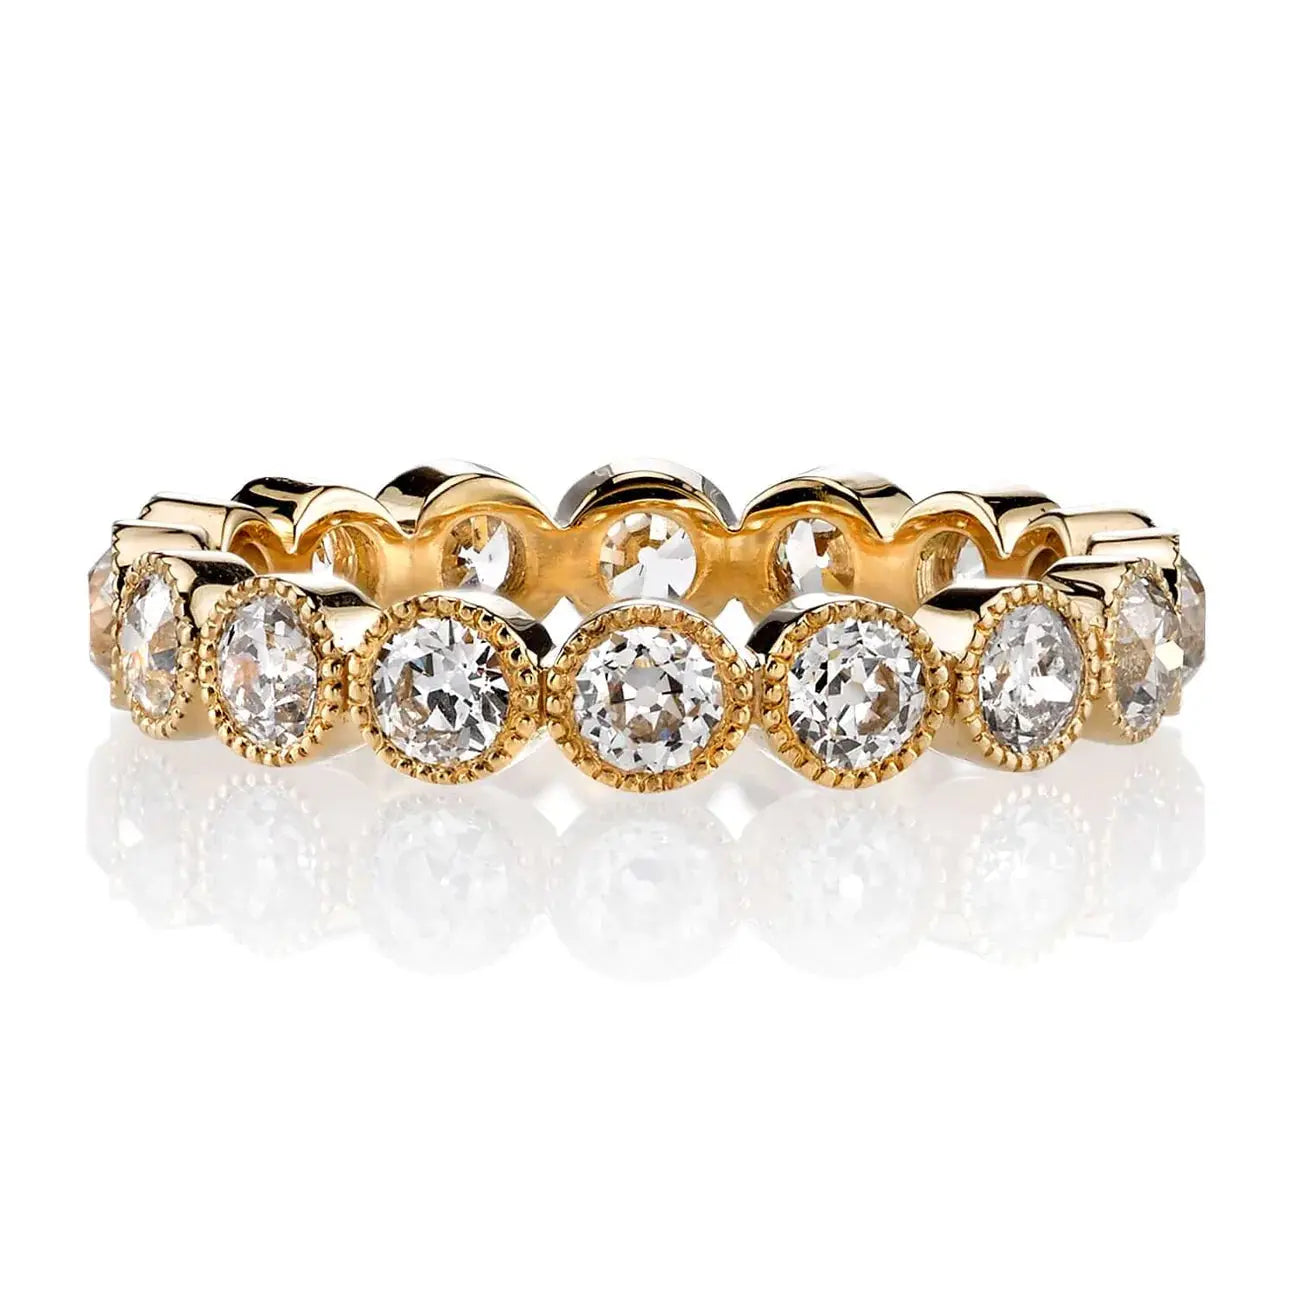 18k yellow gold Medium Gabby Band with Approximately 1.75ctw old European cut diamonds set in a handcrafted bezel set eternity band. Ring size is 6.5. If you need a different size, please email shop@sbvail.com